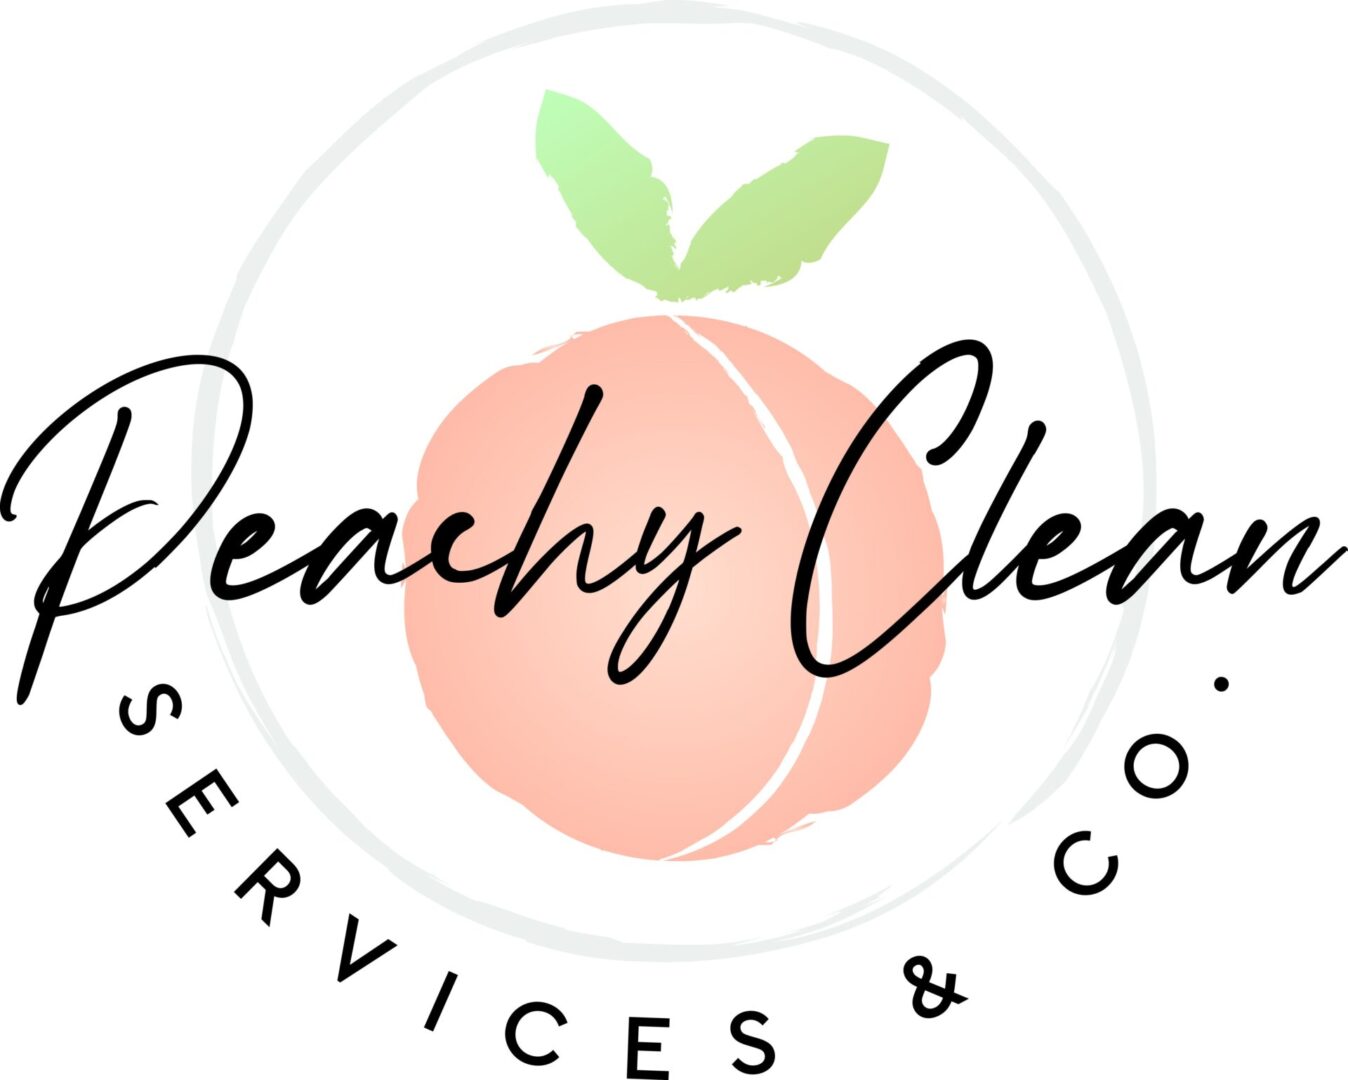 https://peachycleanservicesco.ca/wp-content/uploads/2023/04/CX-84418_Peachy-Clean-Services-Co_FINAL.jpg_1681432877-scaled.jpeg